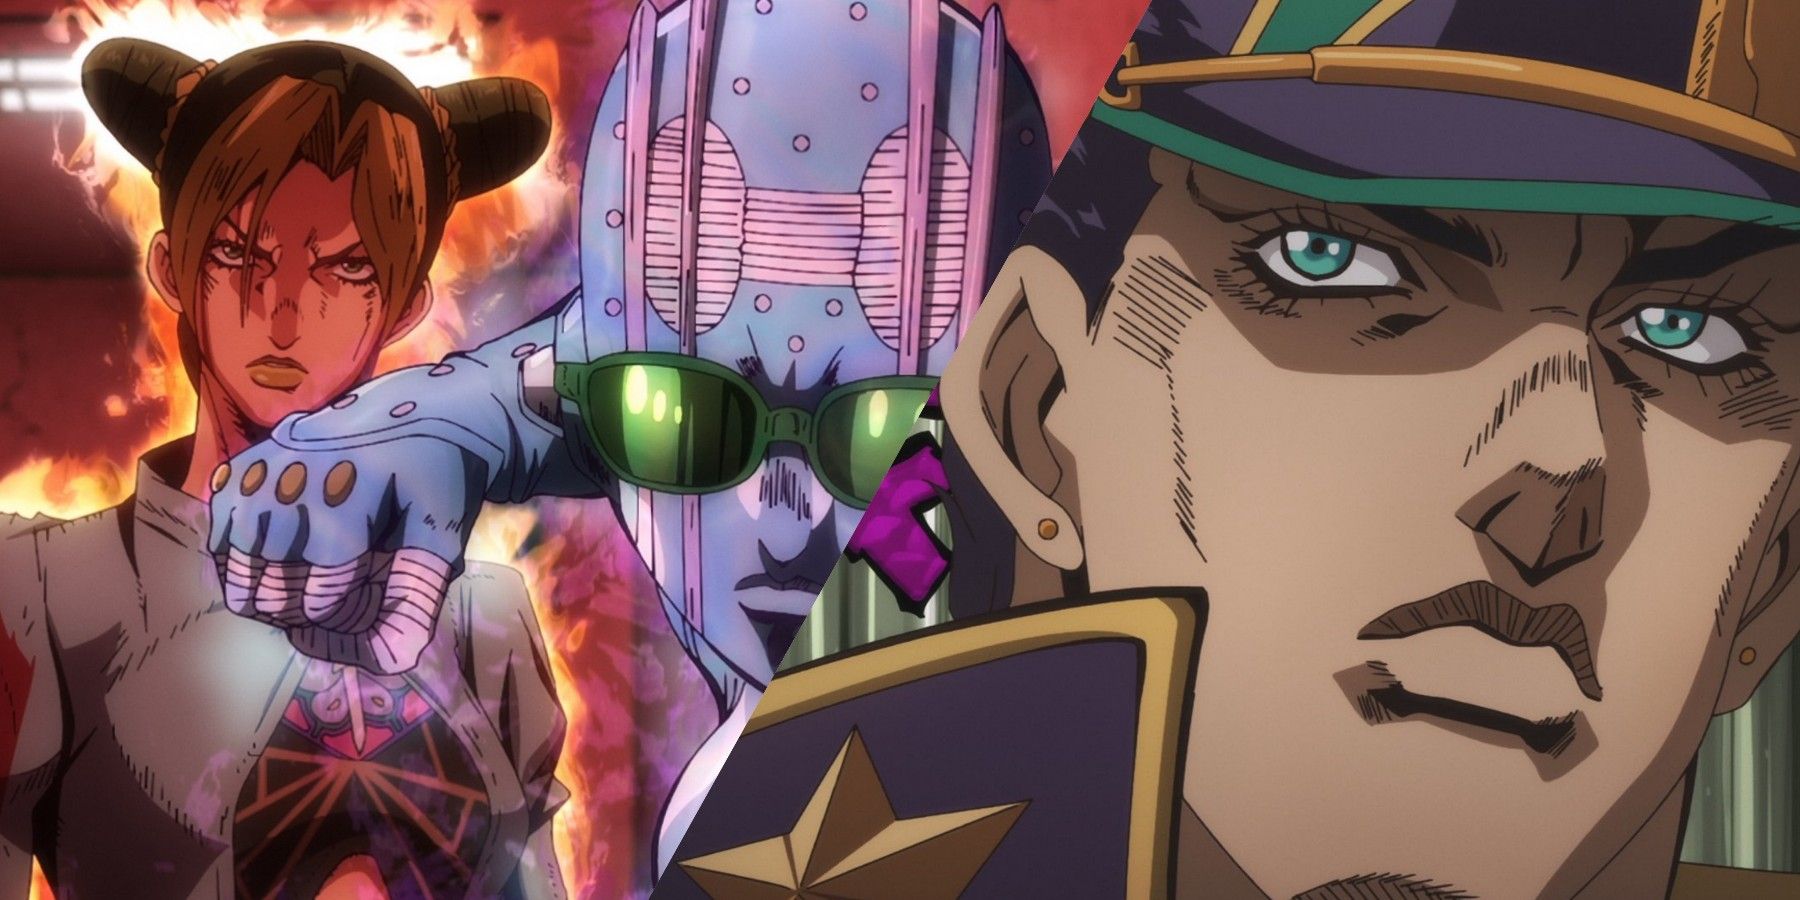 JoJo's Bizarre Adventures: 6 characters who look weak but have unexpectedly  strong Stands